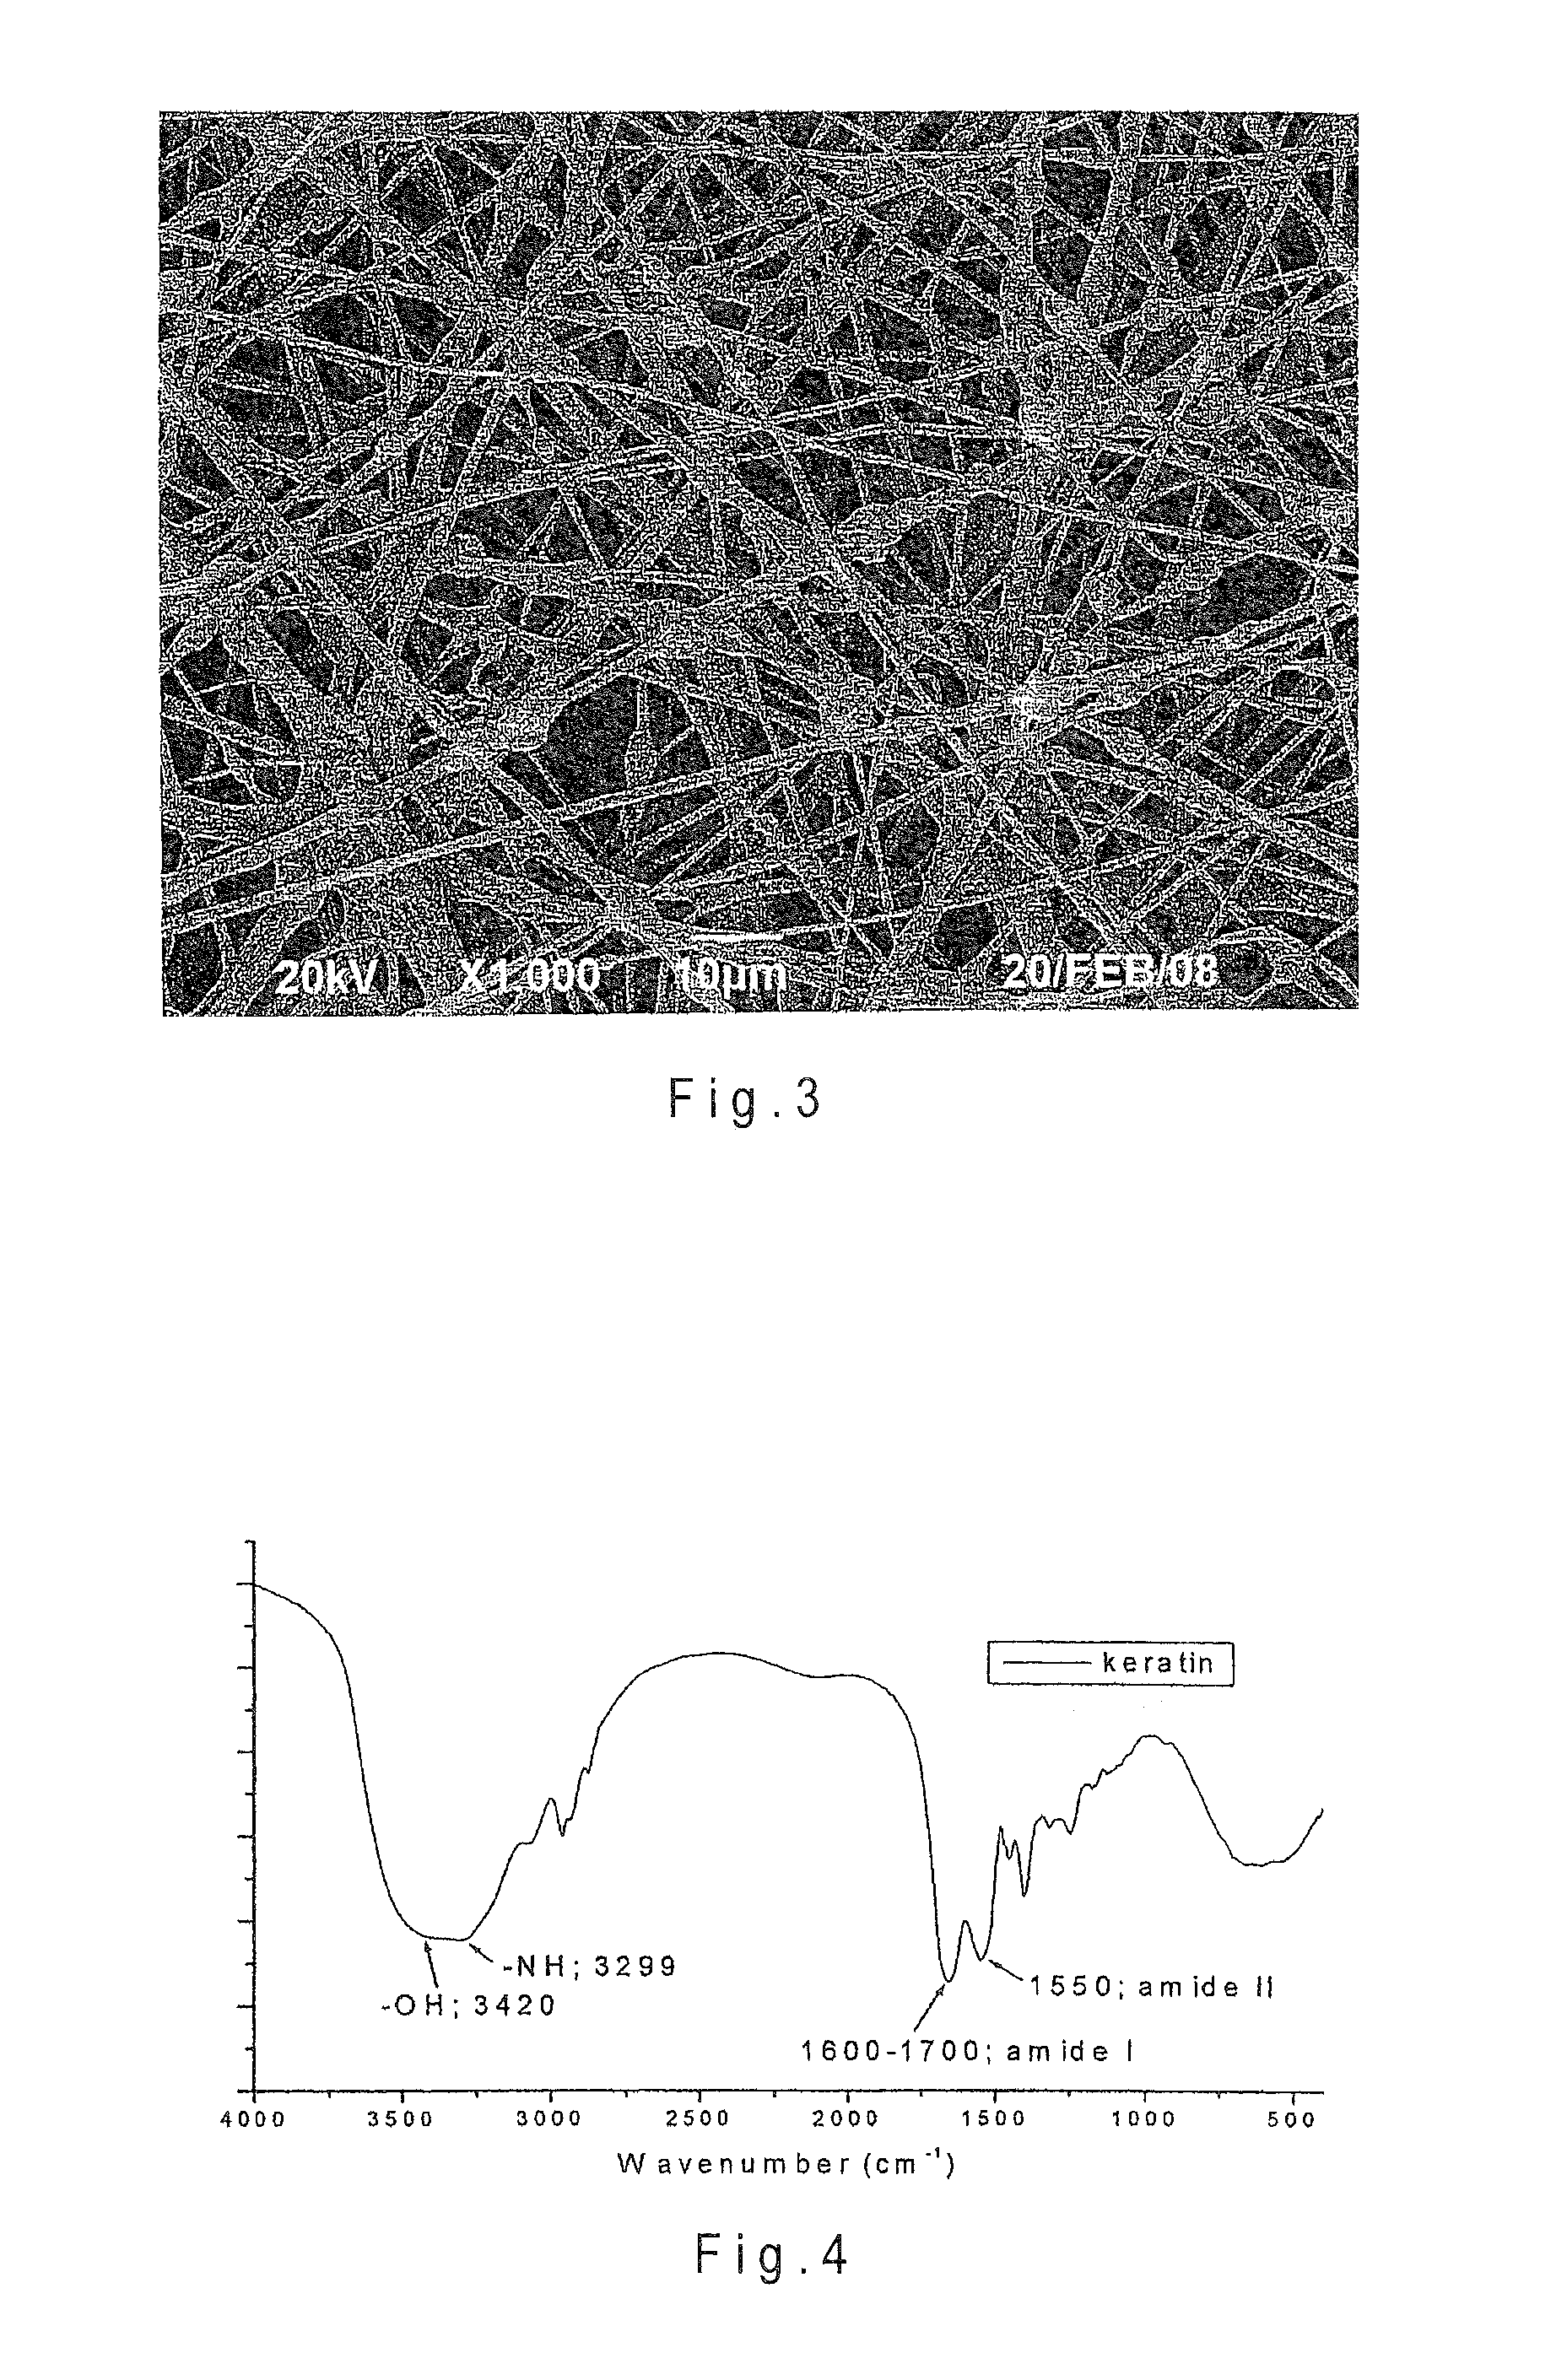 Biodegradable and bioabsorbable biomaterials and keratin fibrous articles for medical applications